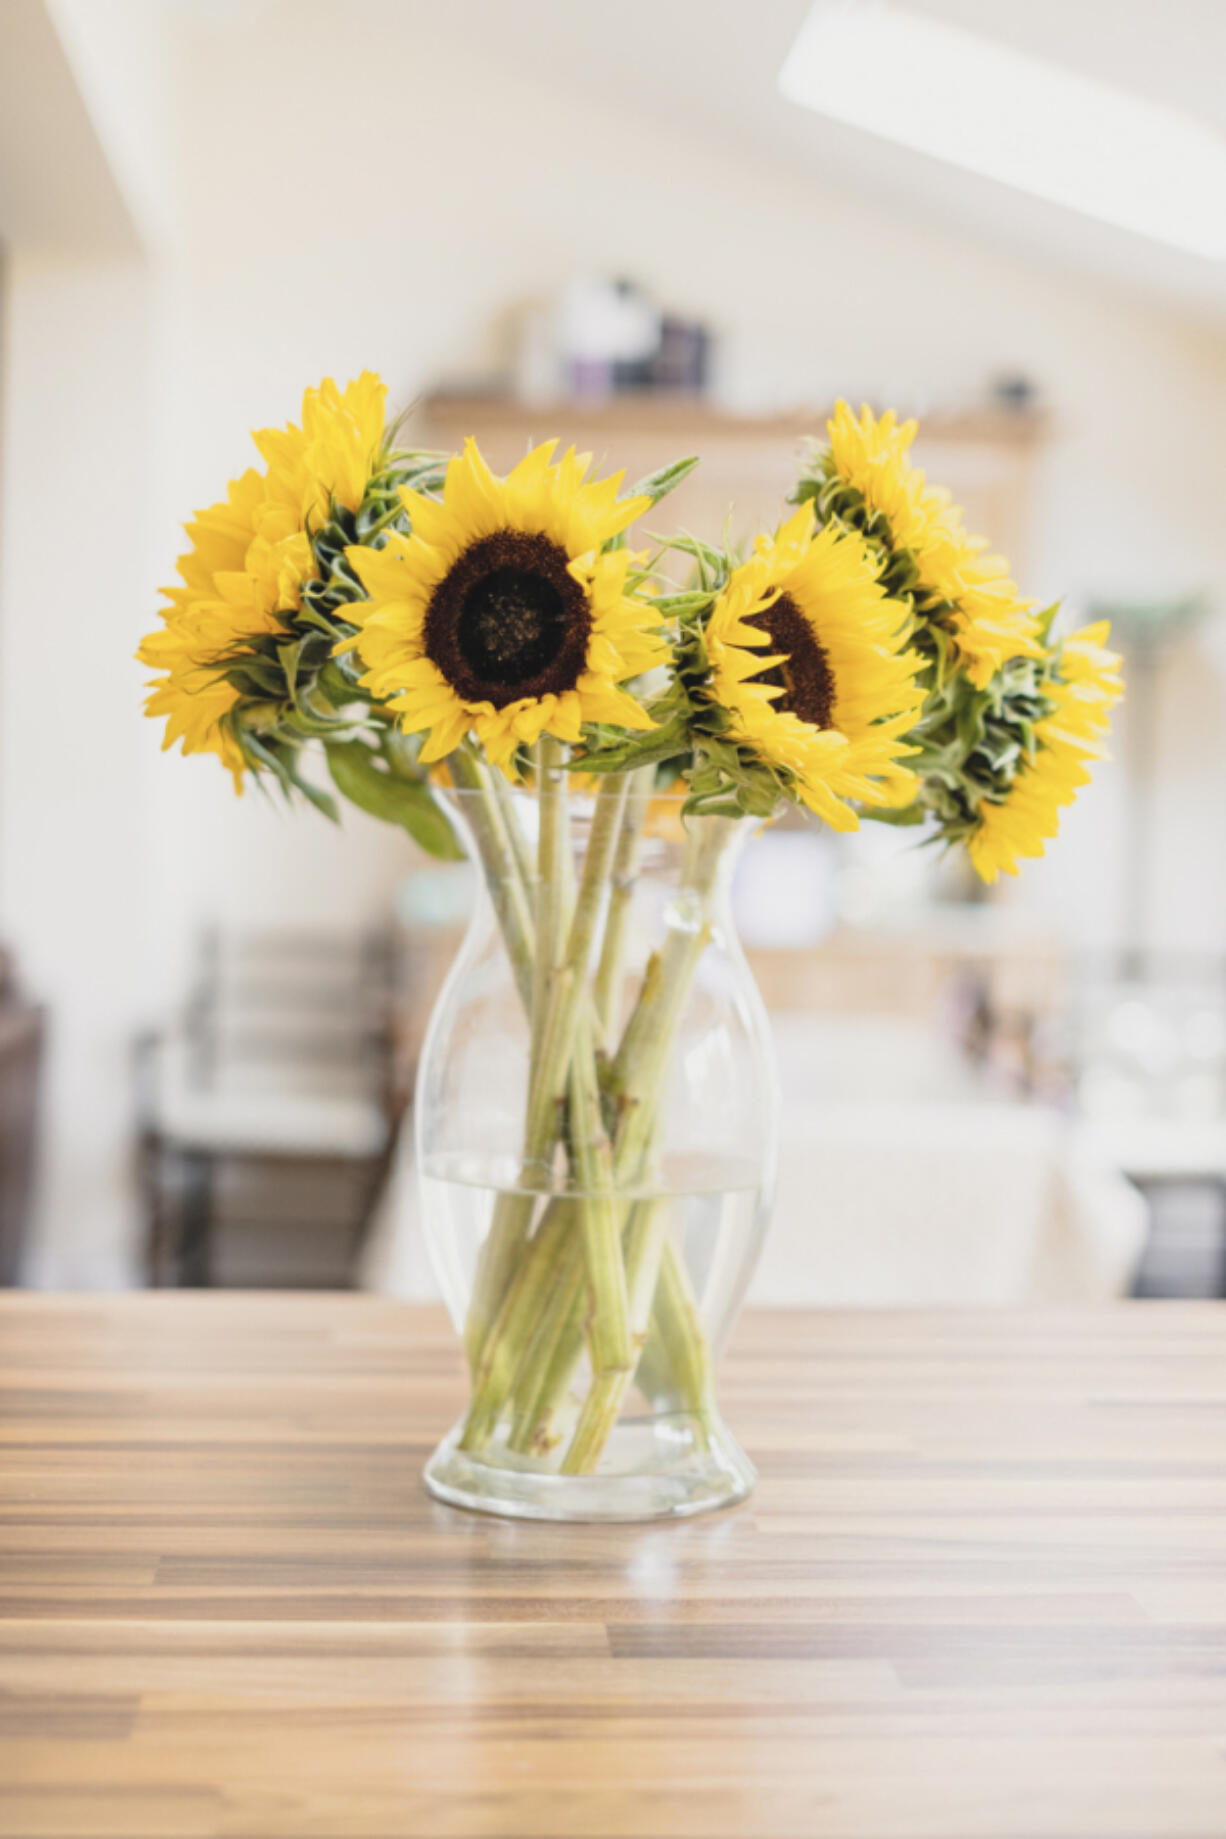 Make your new year bright by resolving to display fresh flowers.